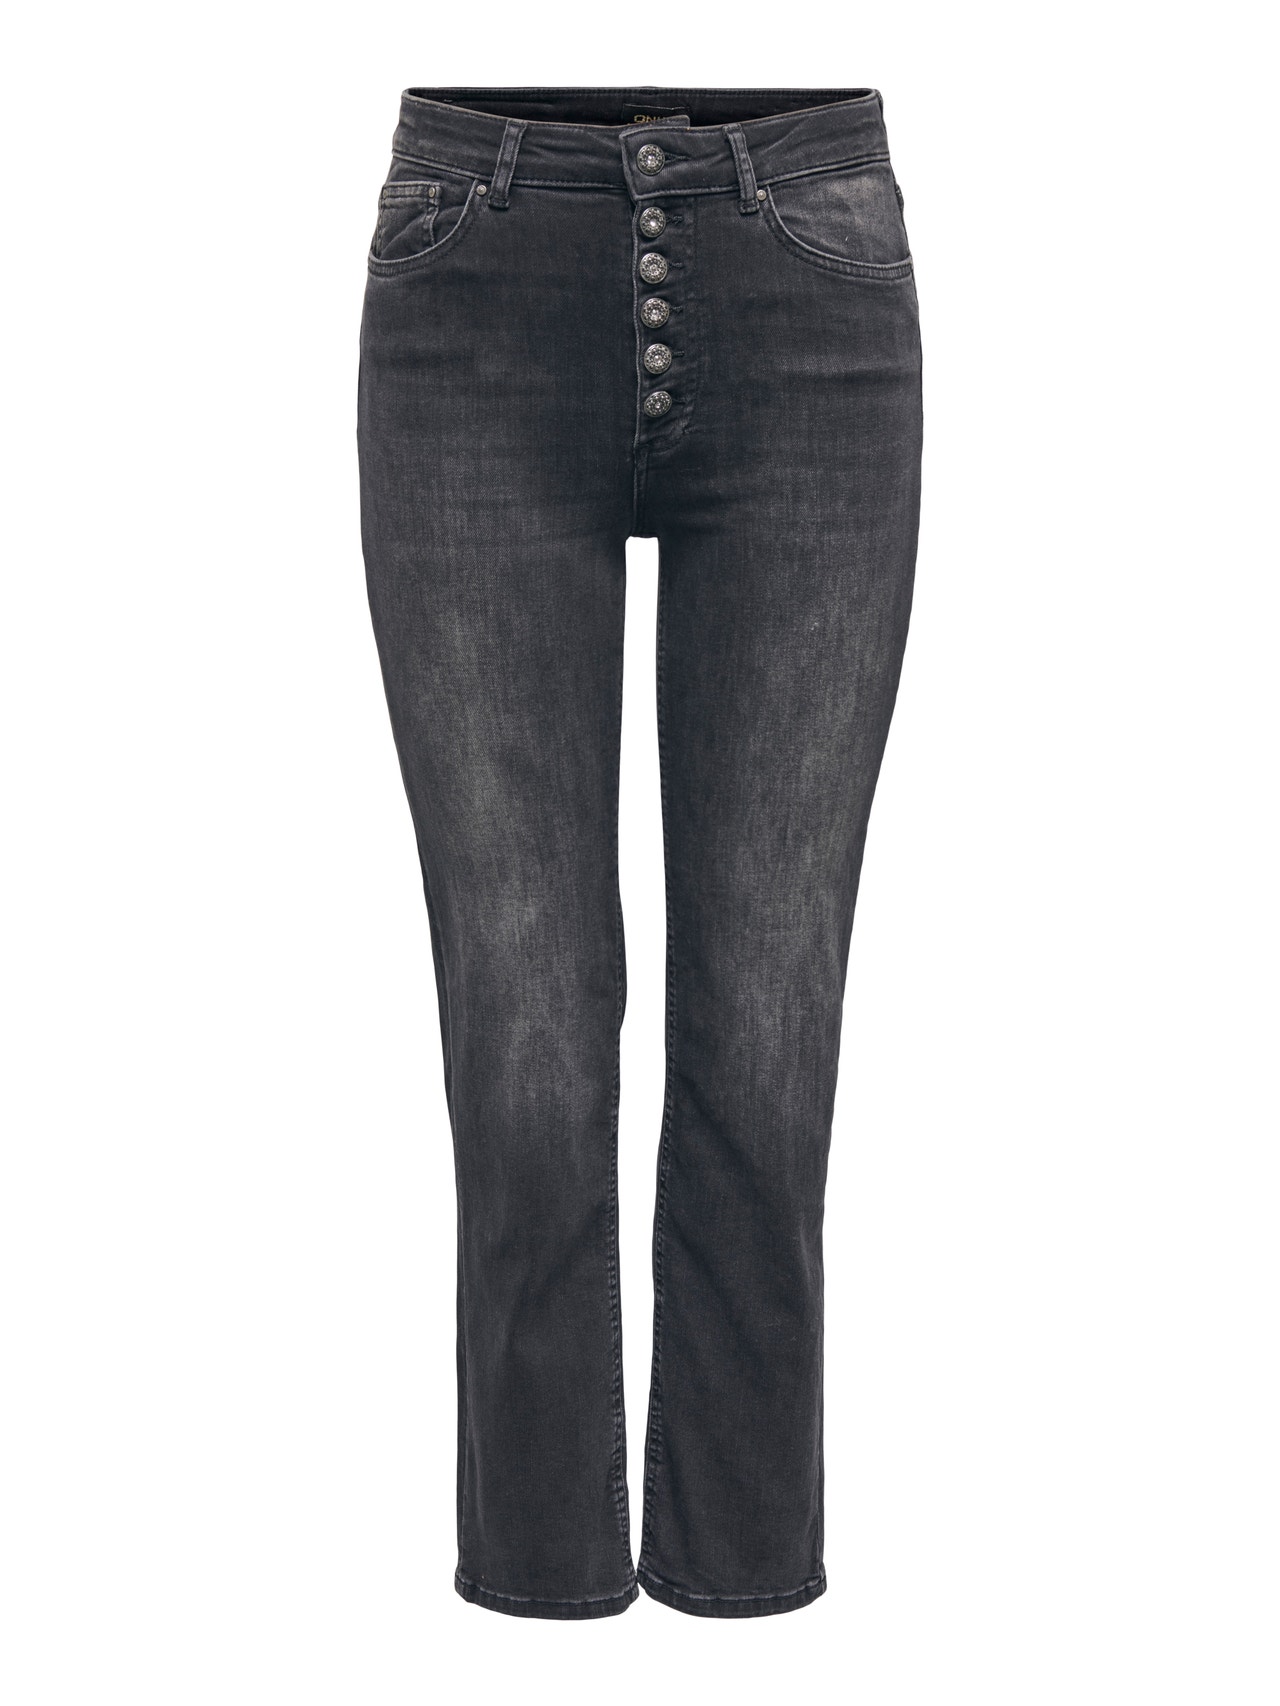 ONLY Straight Fit High waist Jeans -Washed Black - 15265417